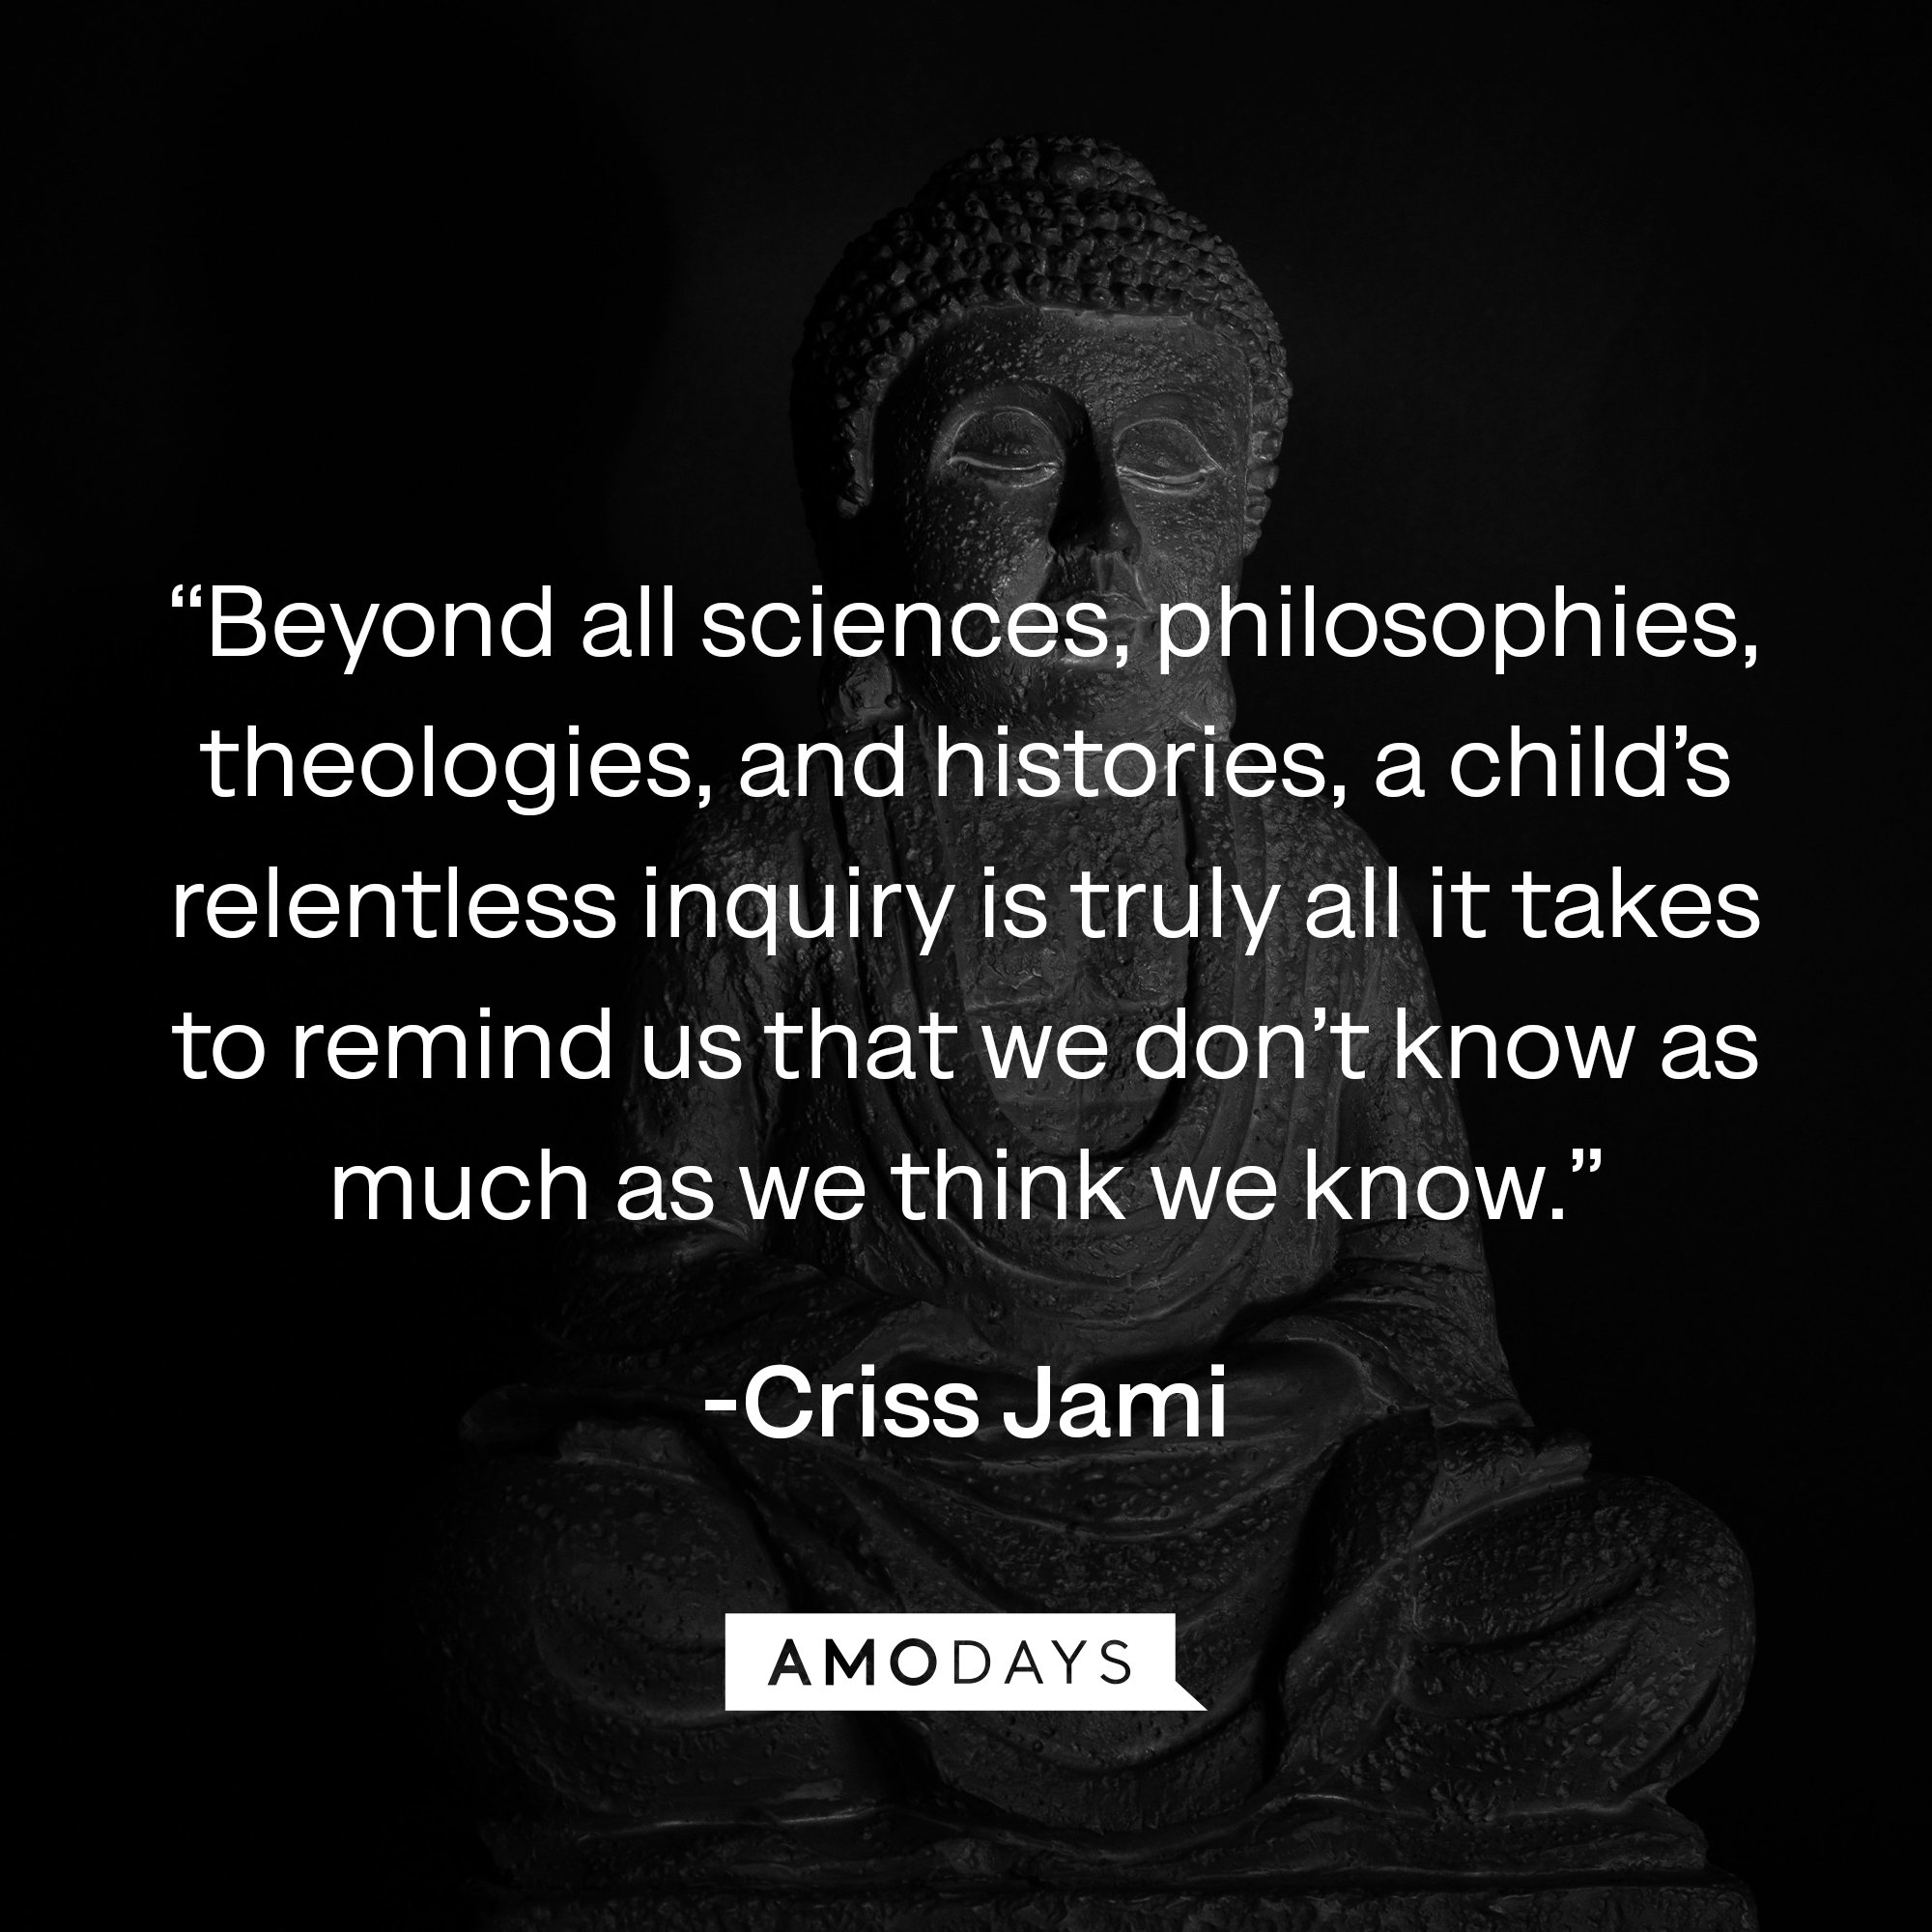 Criss Jami's quote: “Beyond all sciences, philosophies, theologies, and histories, a child’s relentless inquiry is truly all it takes to remind us that we don’t know as much as we think we know.” | Image: AmoDays